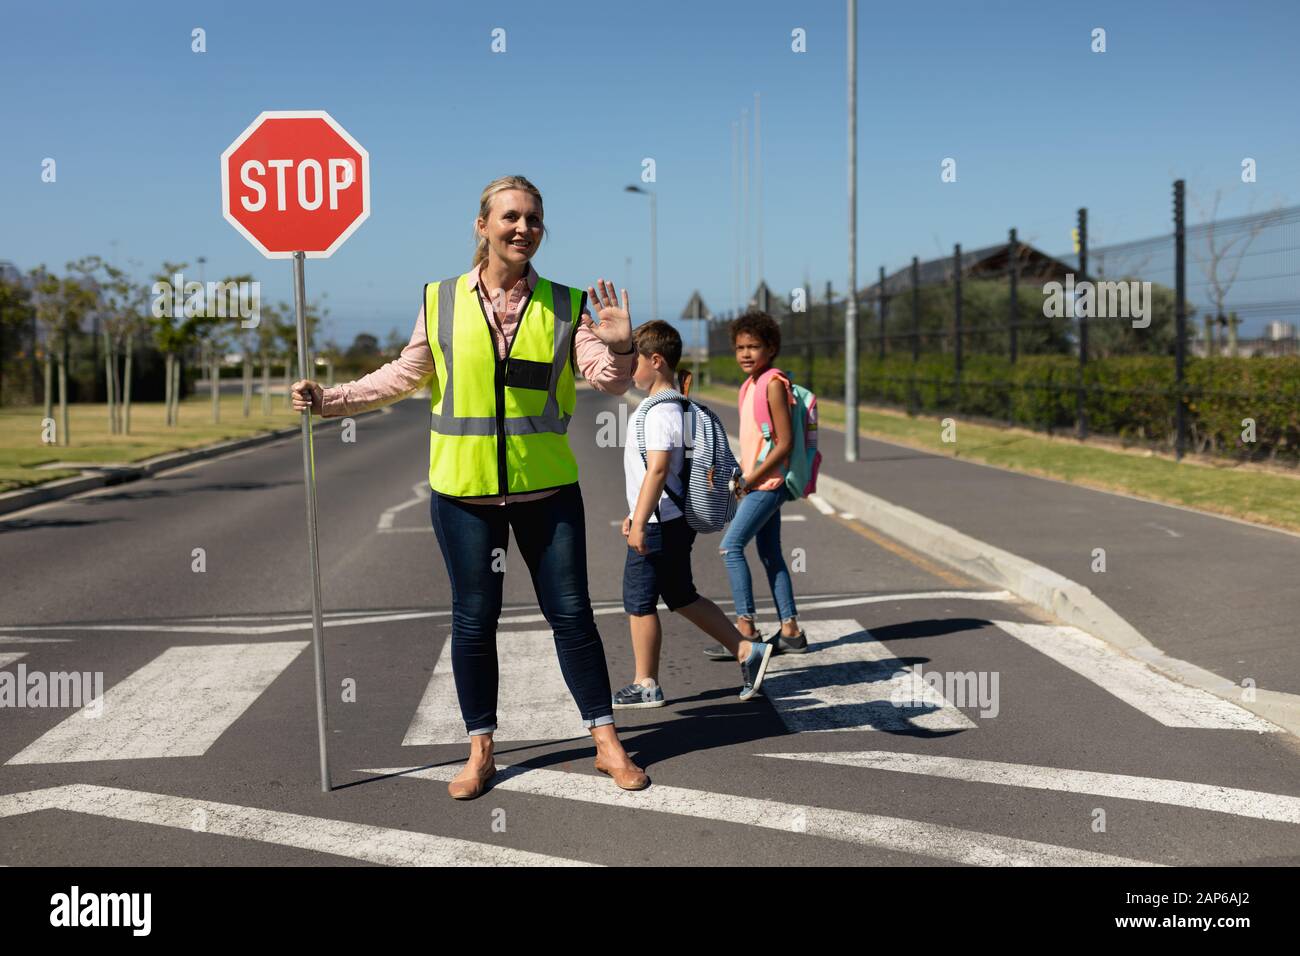 Woman wearing a high visibility vest and holding a stop sign Stock Photo